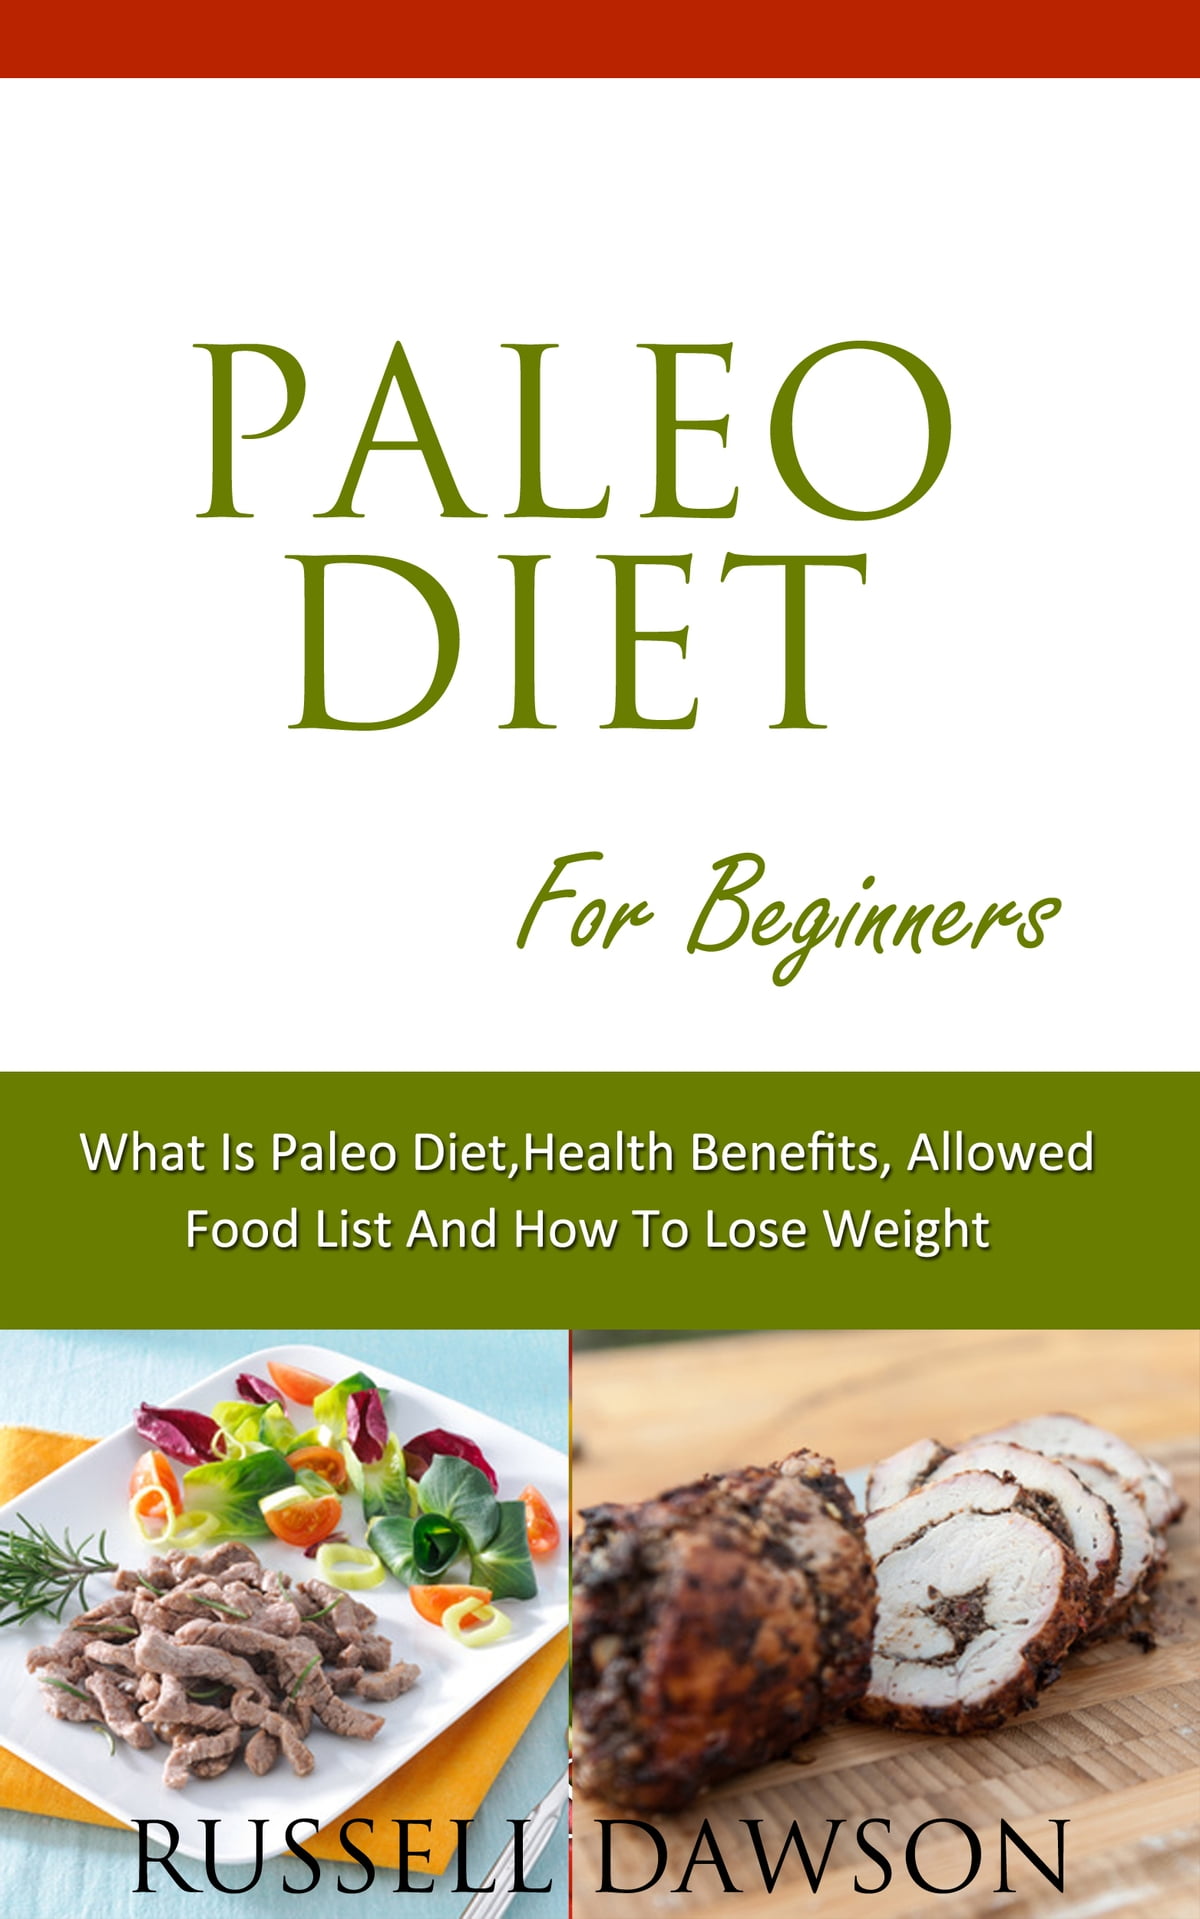 The Paleo Diet and Cholesterol
